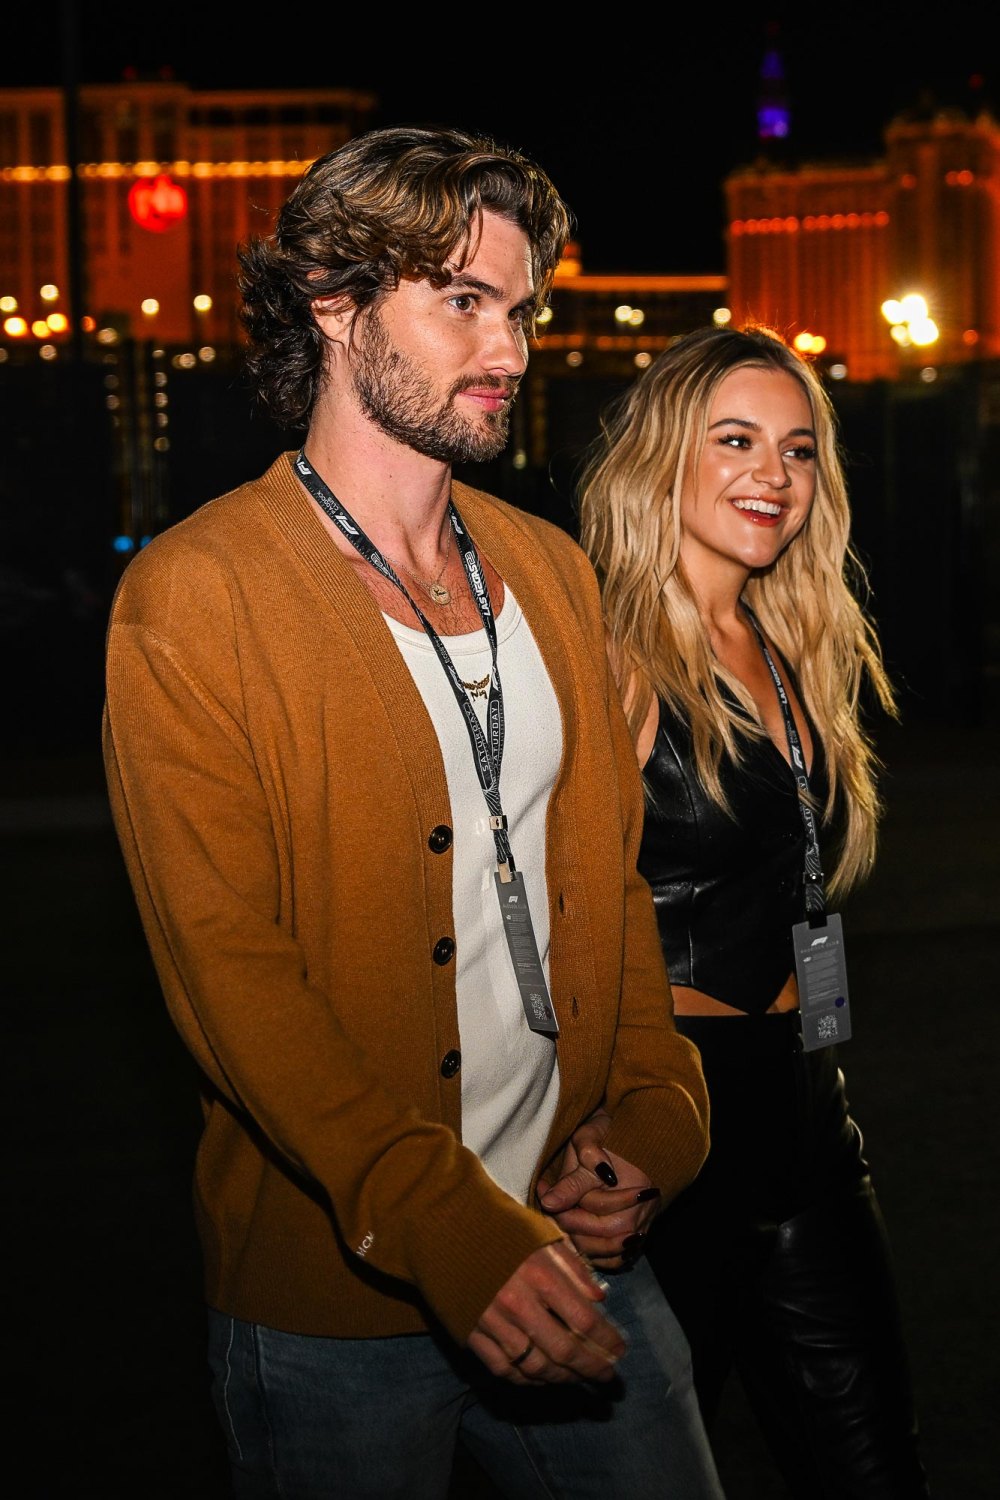 Kelsea Ballerini Drops How Do I Do This Music Video Featuring Chase Stokes Cameo 776